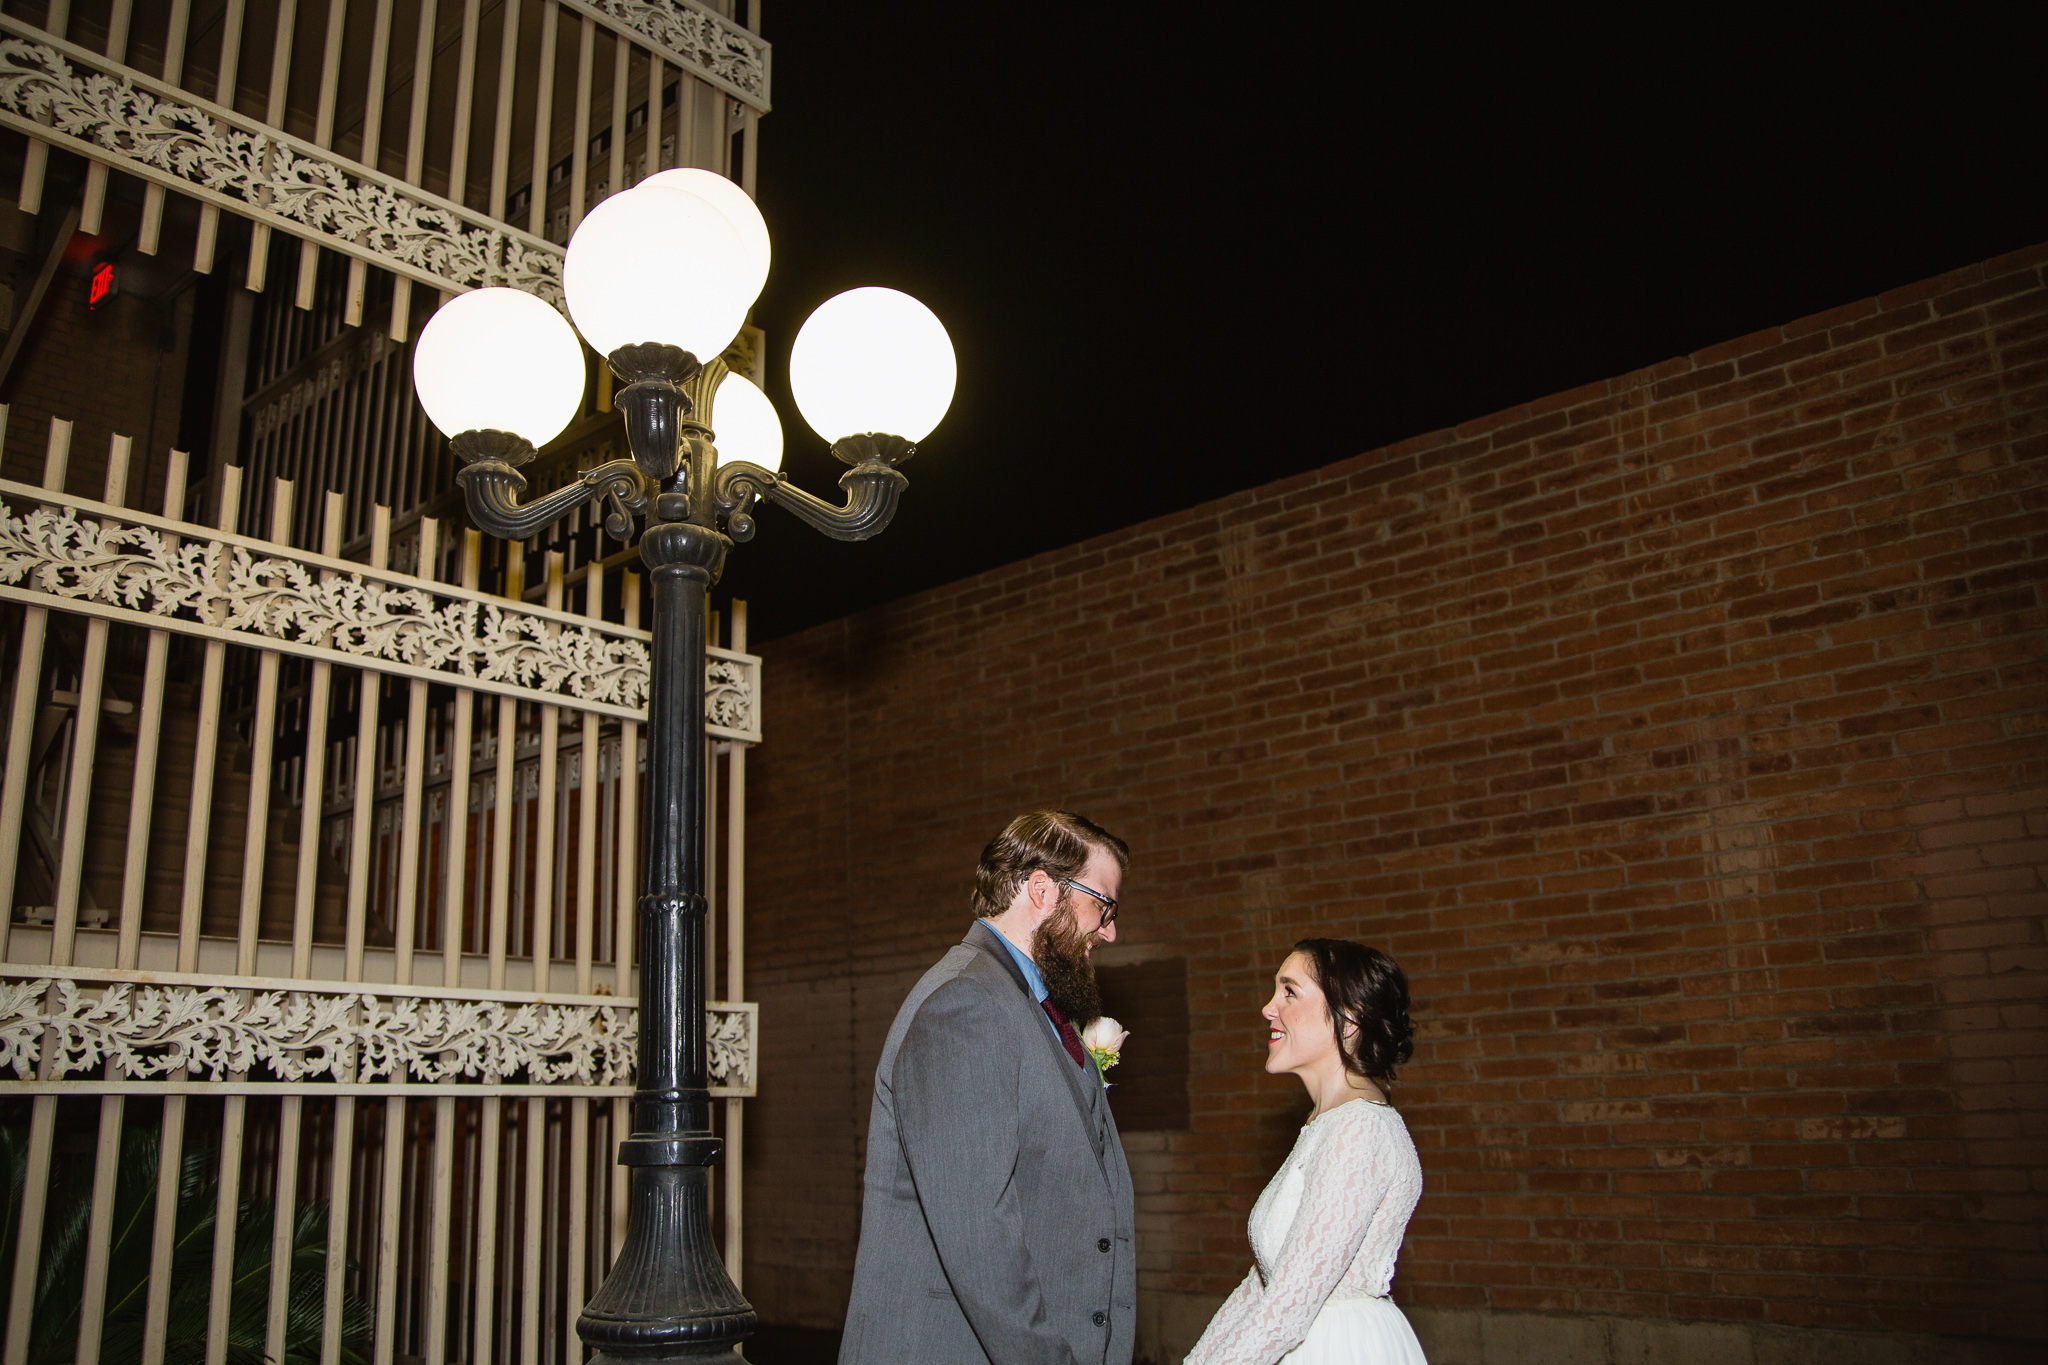 Vintage inspired bride and groom in front of a vintage stairwell and lamp on their wedding day.